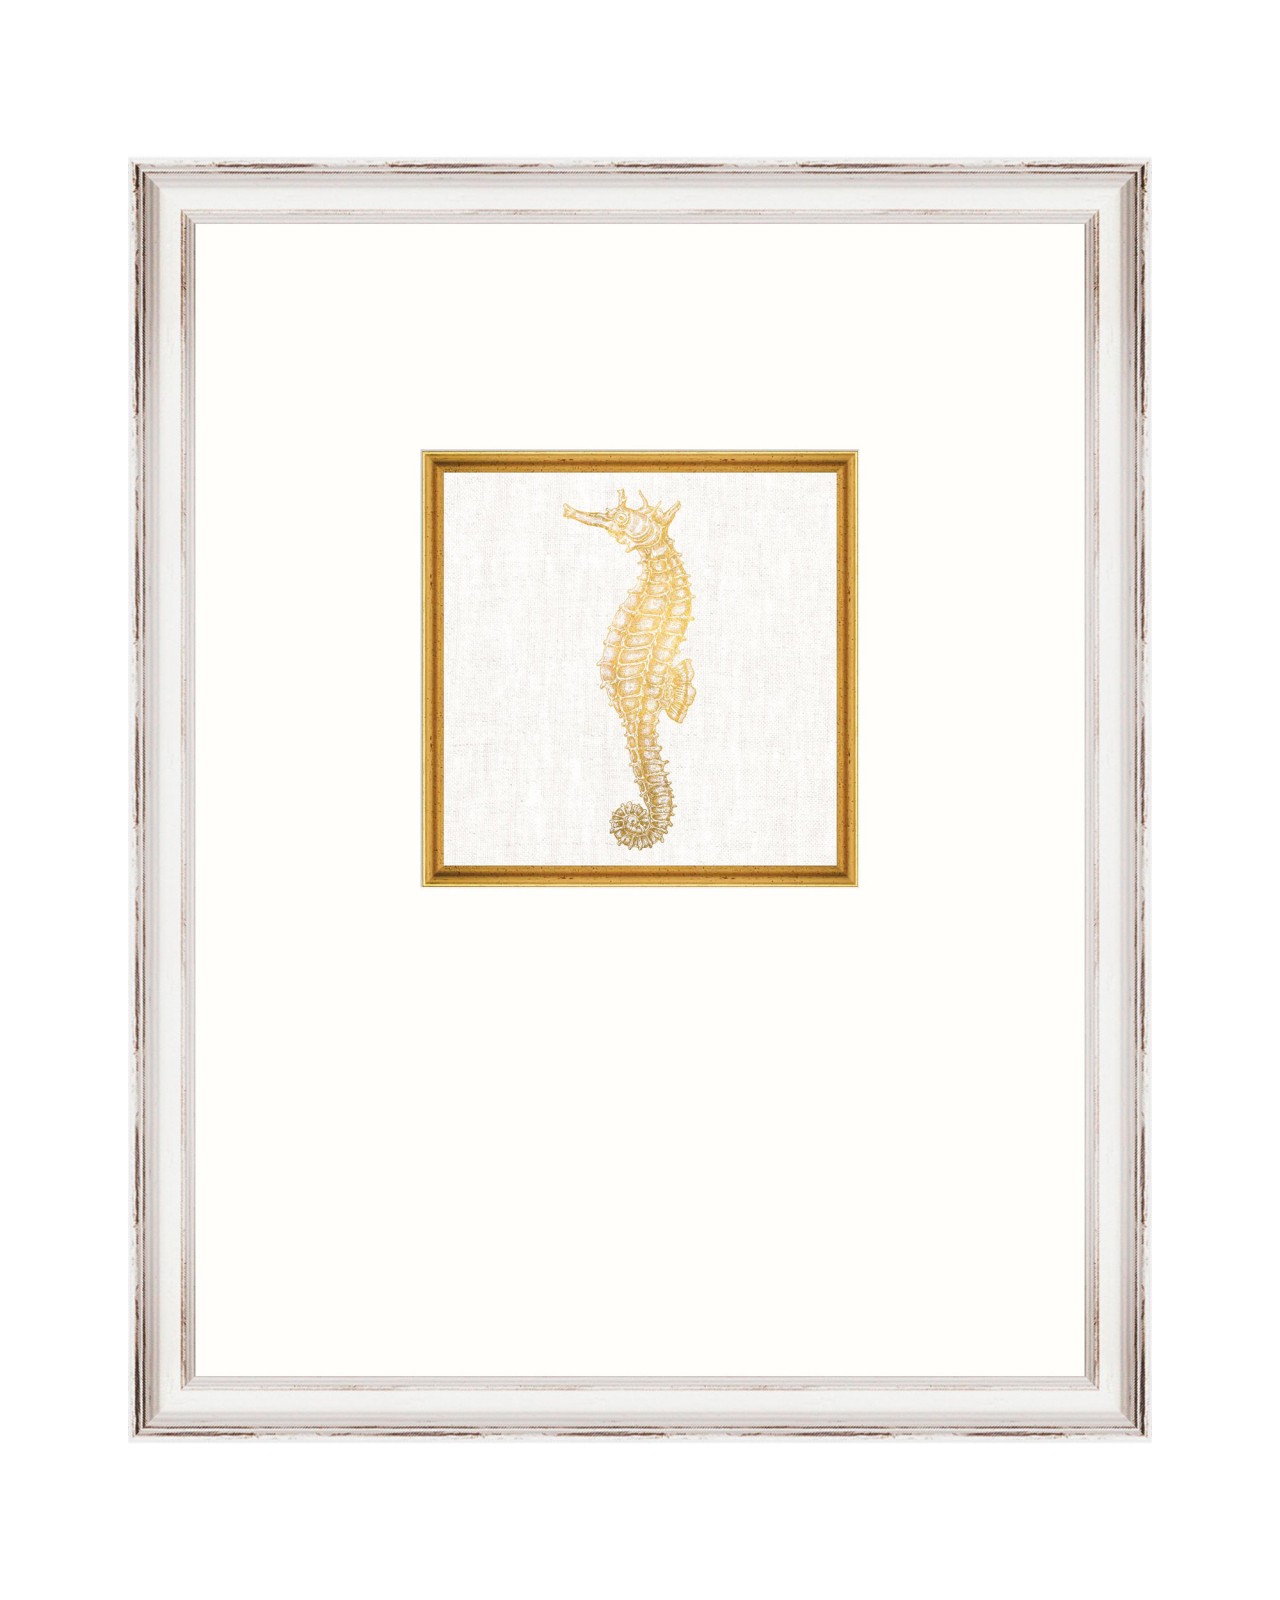 images/productimages/small/framed-linen-seahorse-framed-art-35x45cm-fa13288.jpg